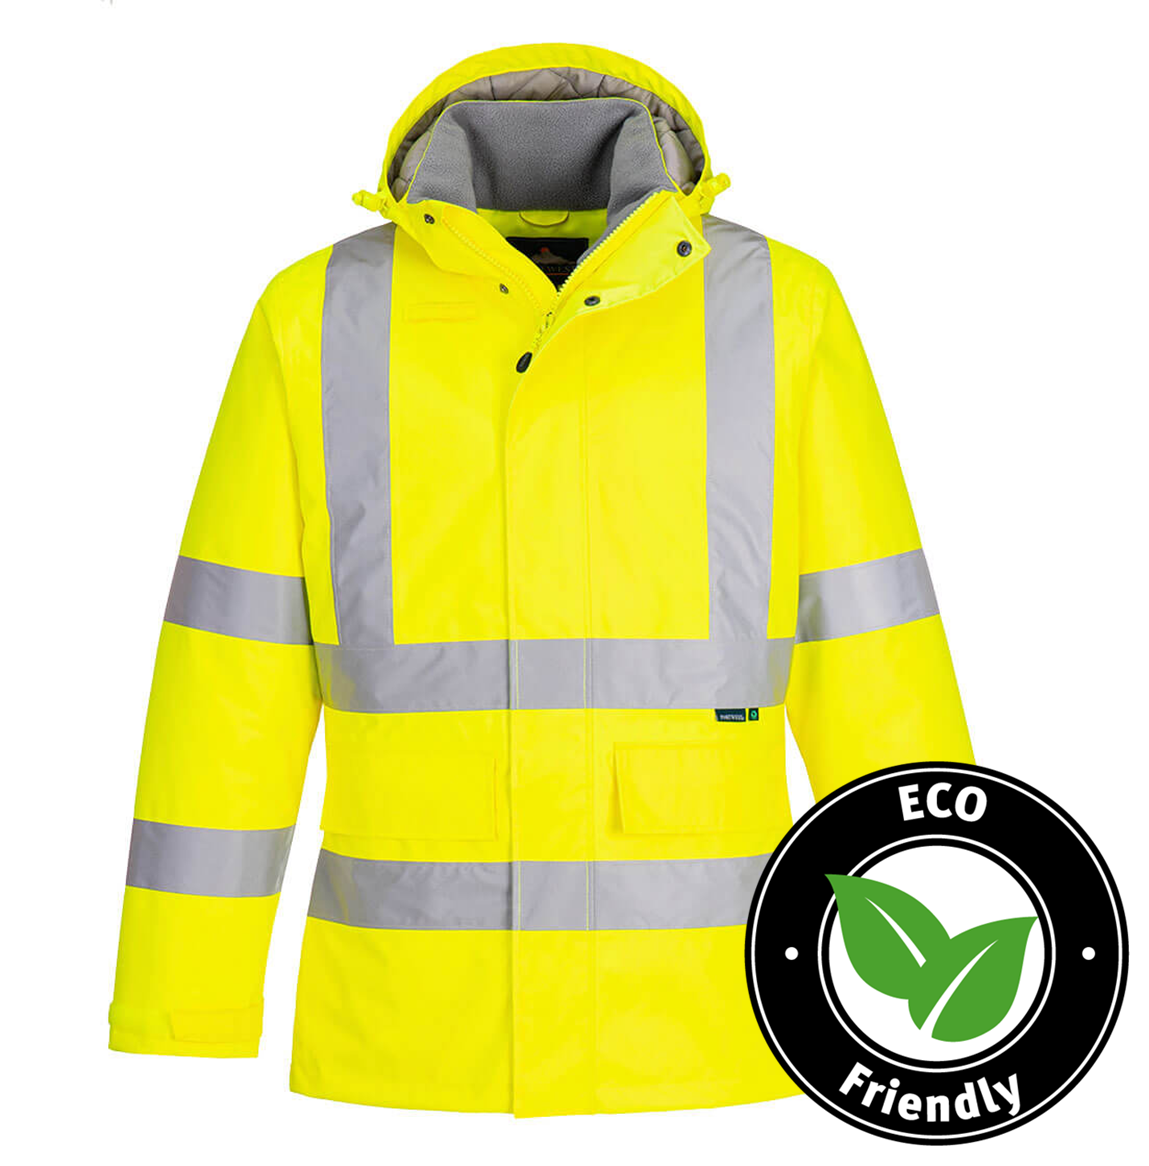 Portwest® Planet EC60 ECO Hi-Vis Winter Jackets are made with environmentally friendly recycled polyester and features reflective tape, detachable lined hood, mic tabs, drawcord, internal pocket and water resistant fabric finish.